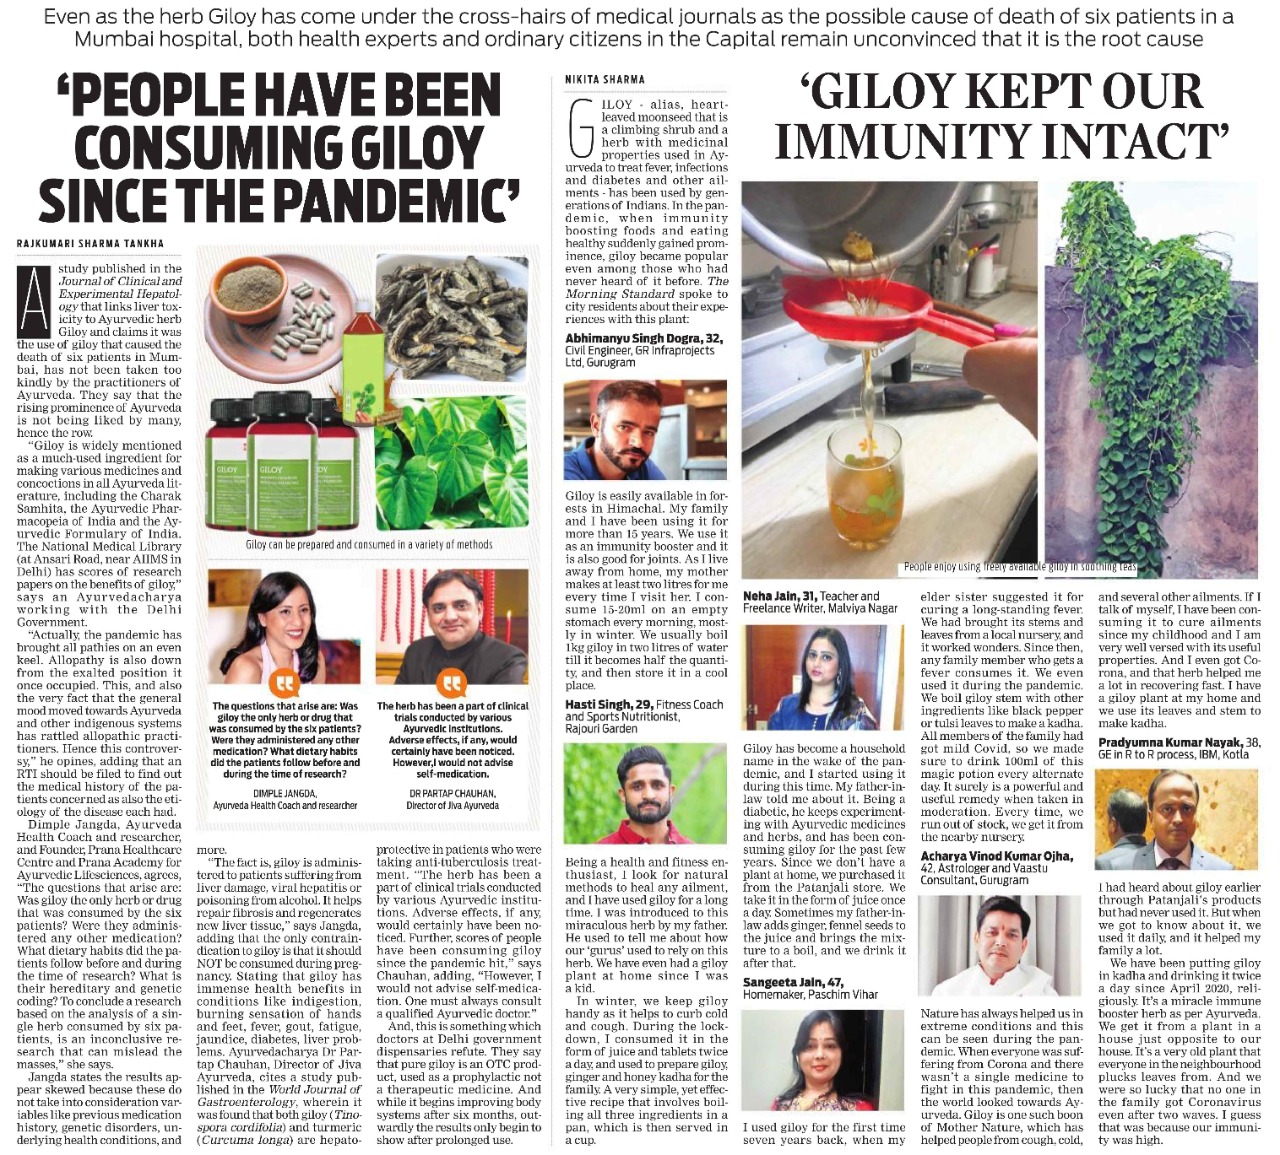 Opinion on giloy by Dr. Partap Chauhan 